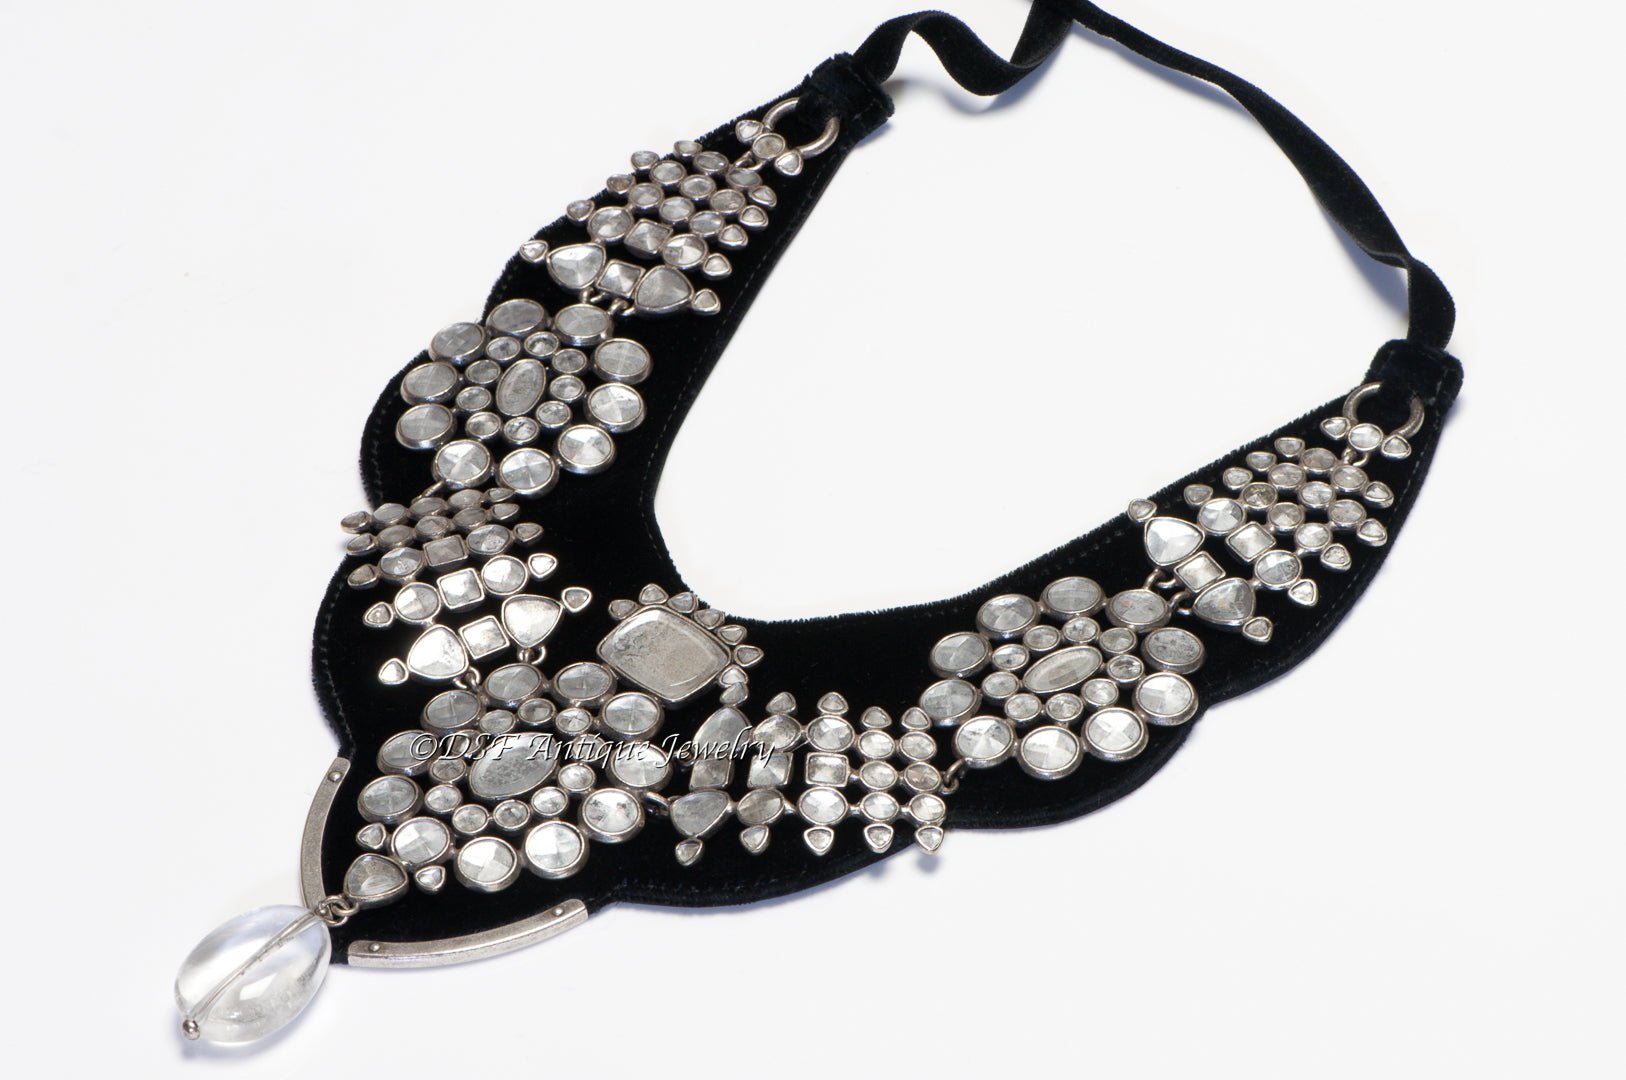 Yves Saint Laurent 2002 Tom Ford Mughal Style Rock Crystal Black Satin Necklace